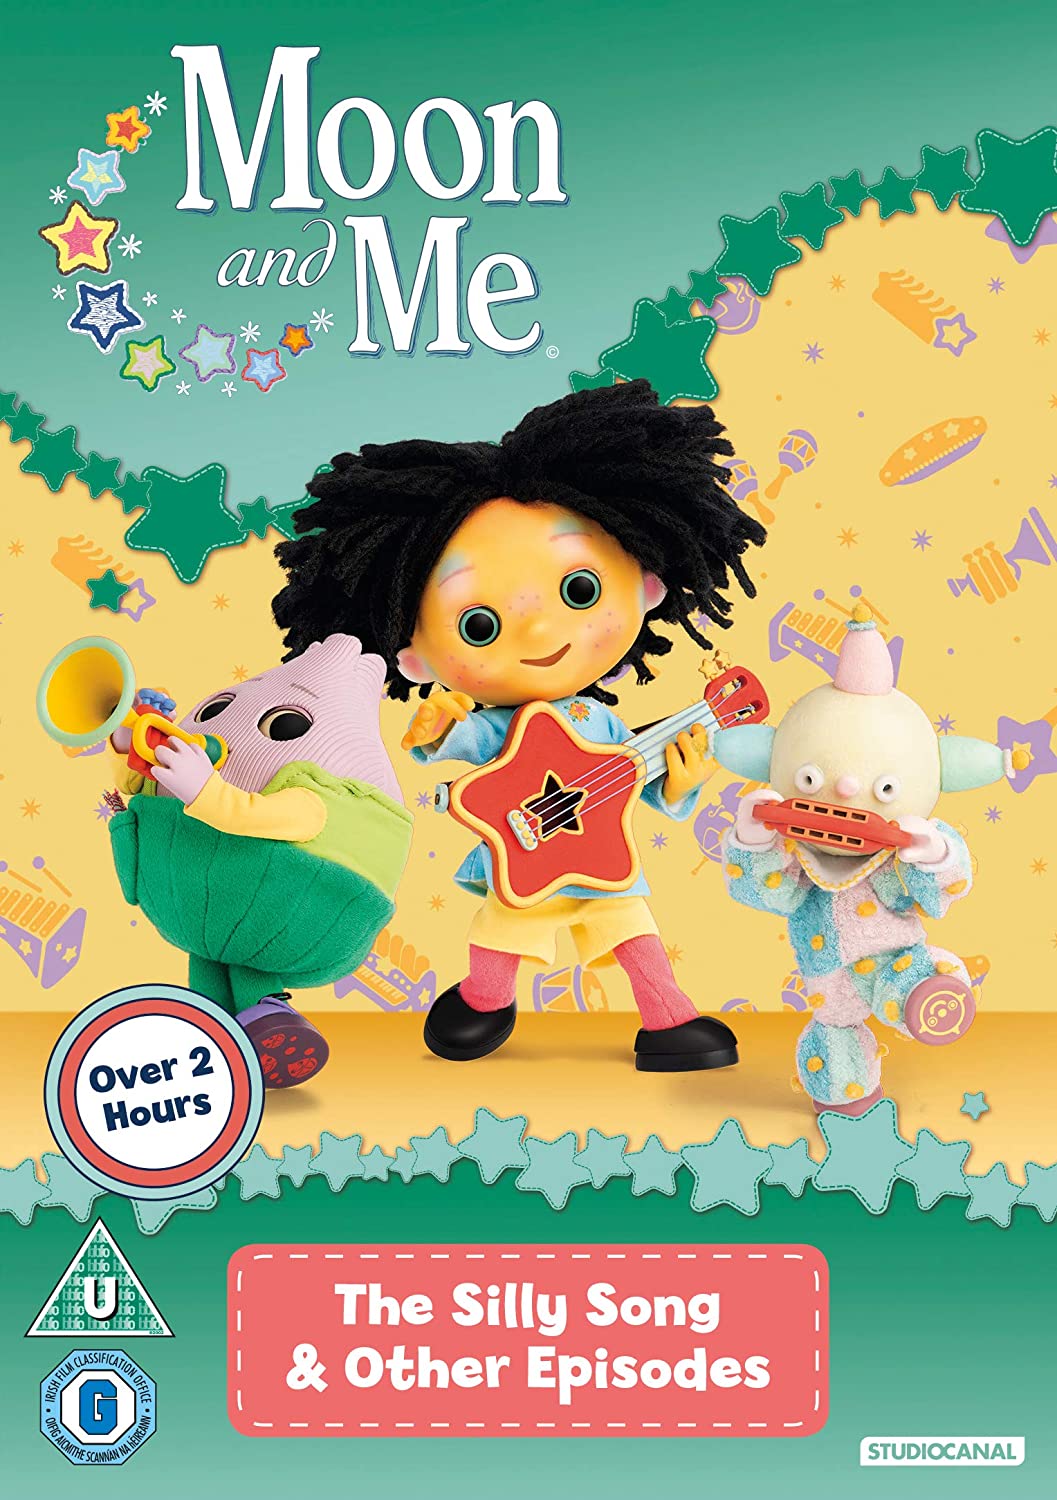 Moon And Me – The Silly Song und andere Episoden – Familie/Animation [DVD]